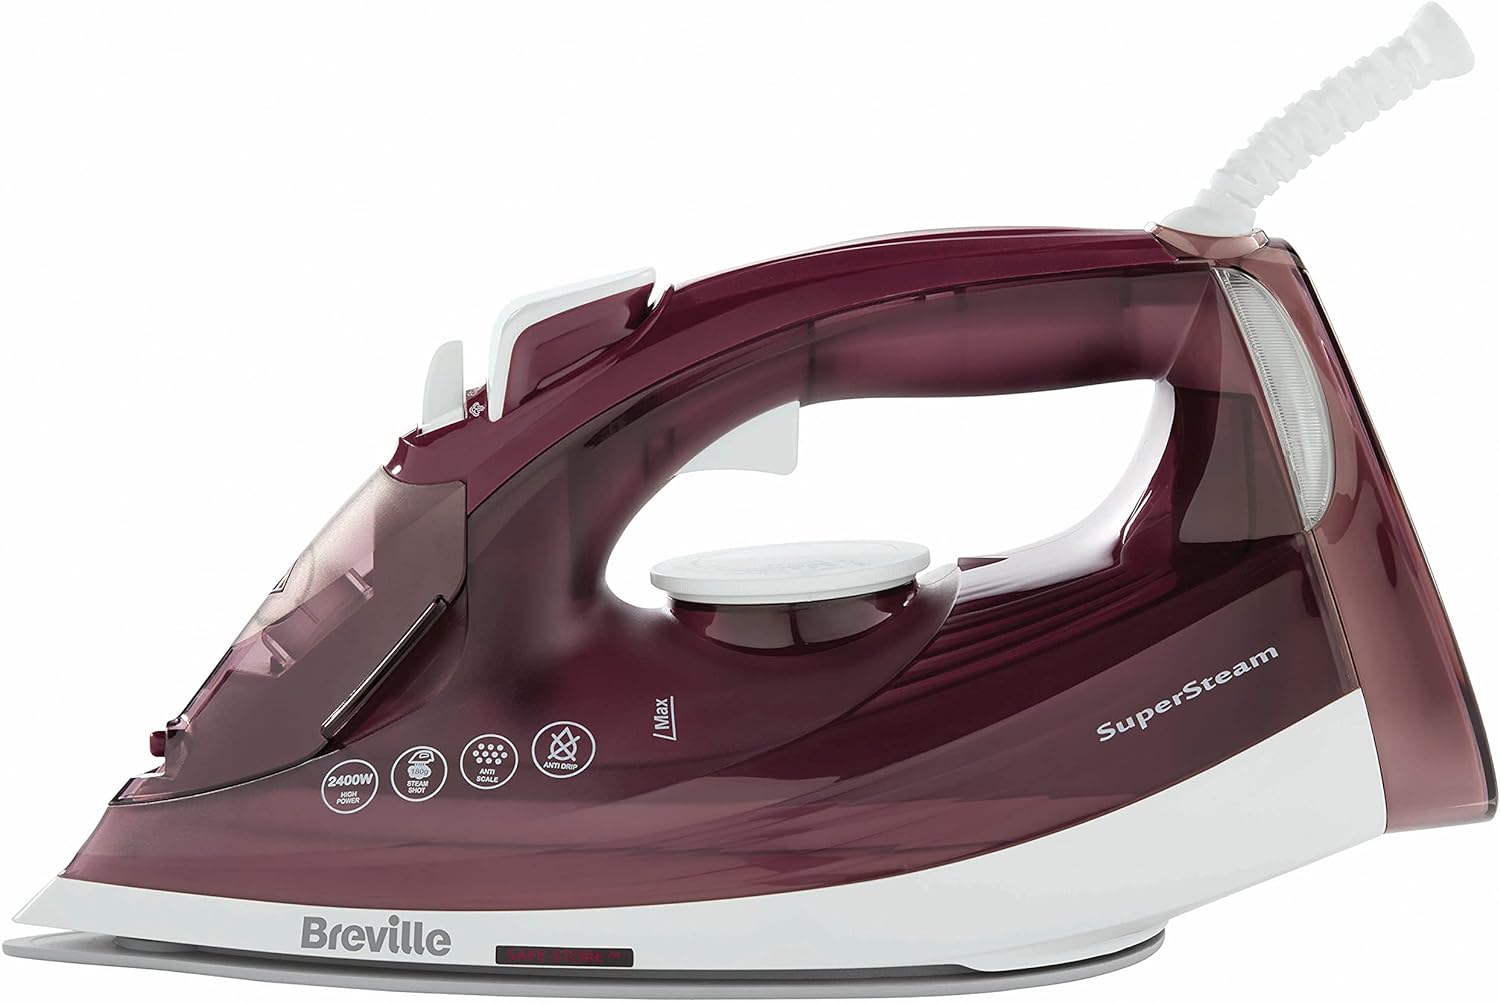 side view of breville 412 model steam iron